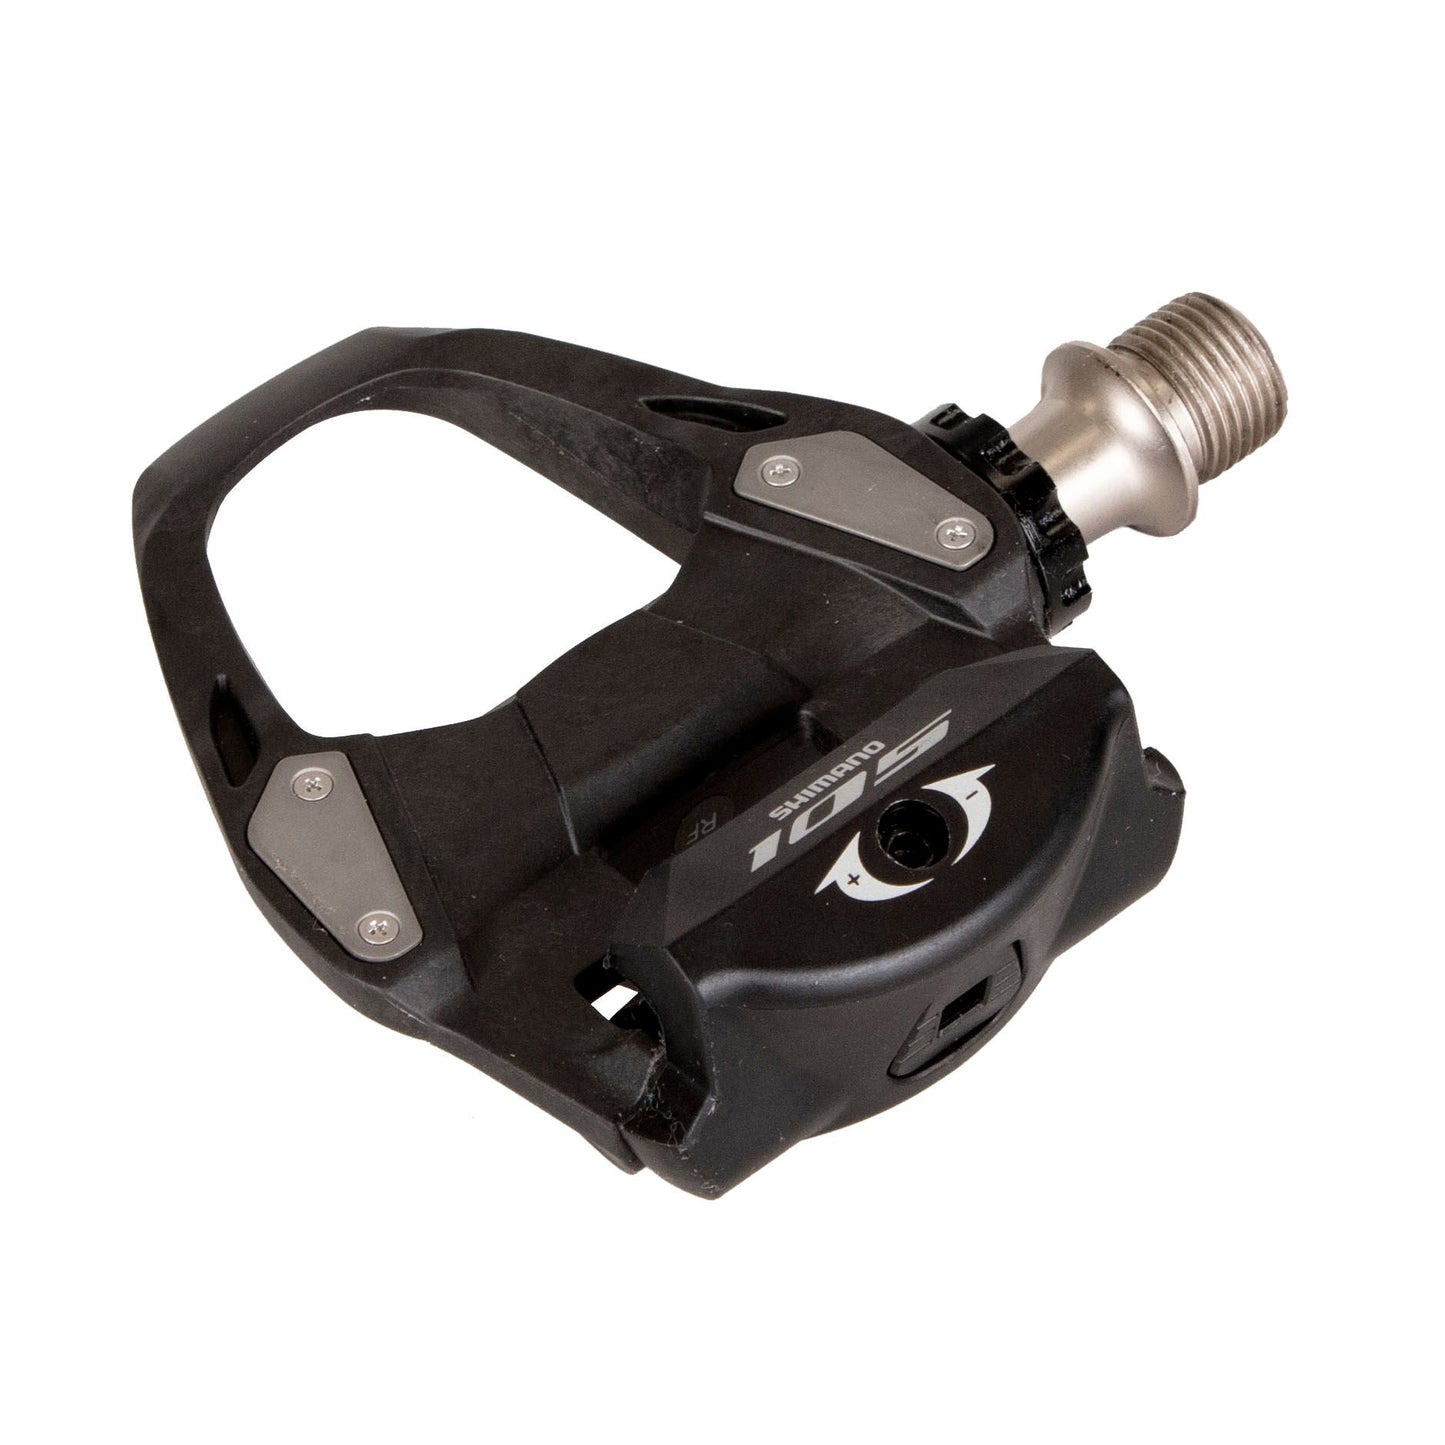 Shimano 105 PD-R7000 pedals